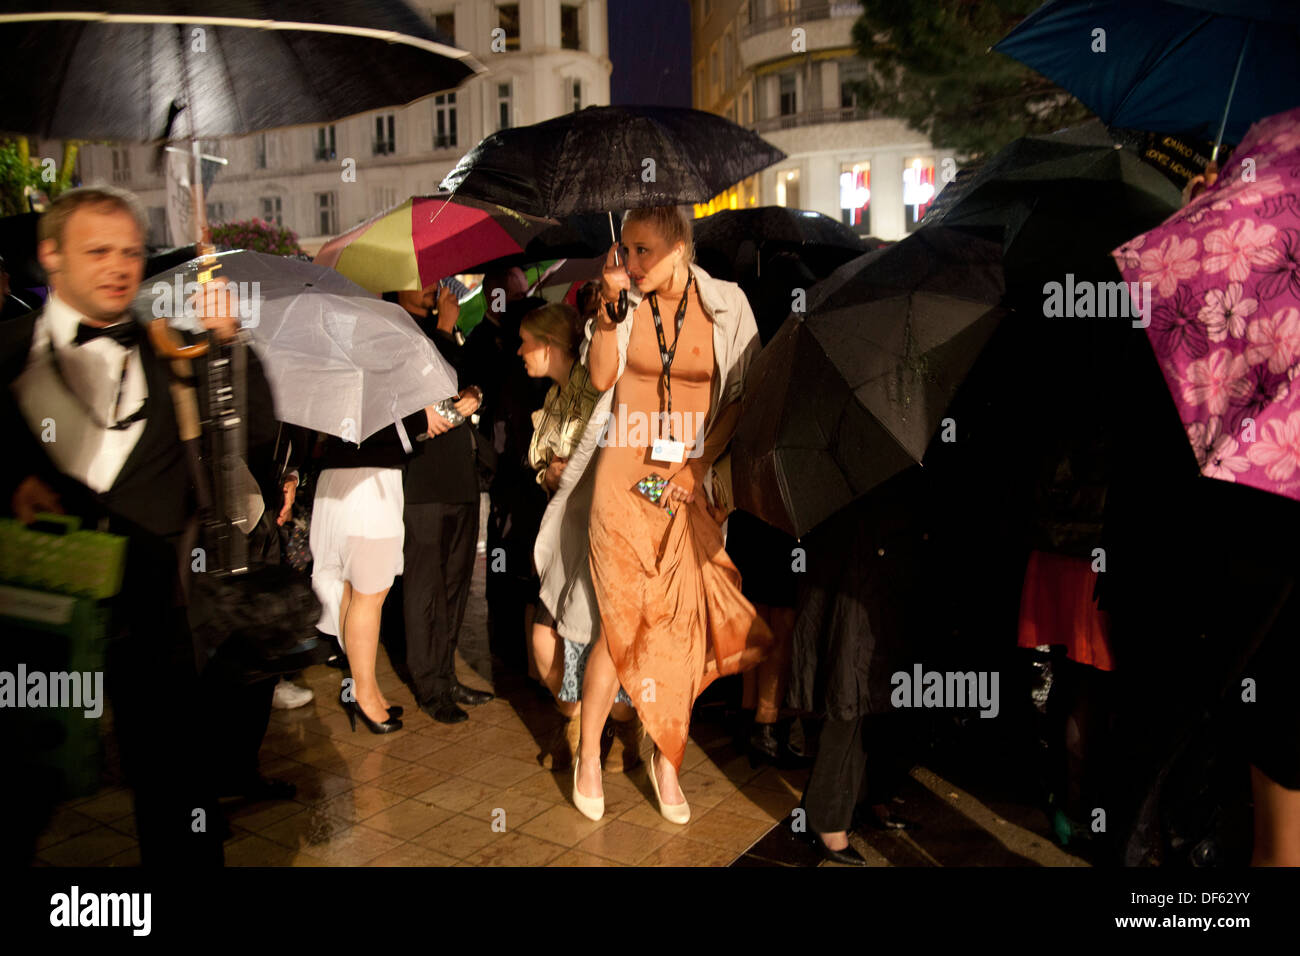 Bad Weather at Cannes Film Festival Stock Photo